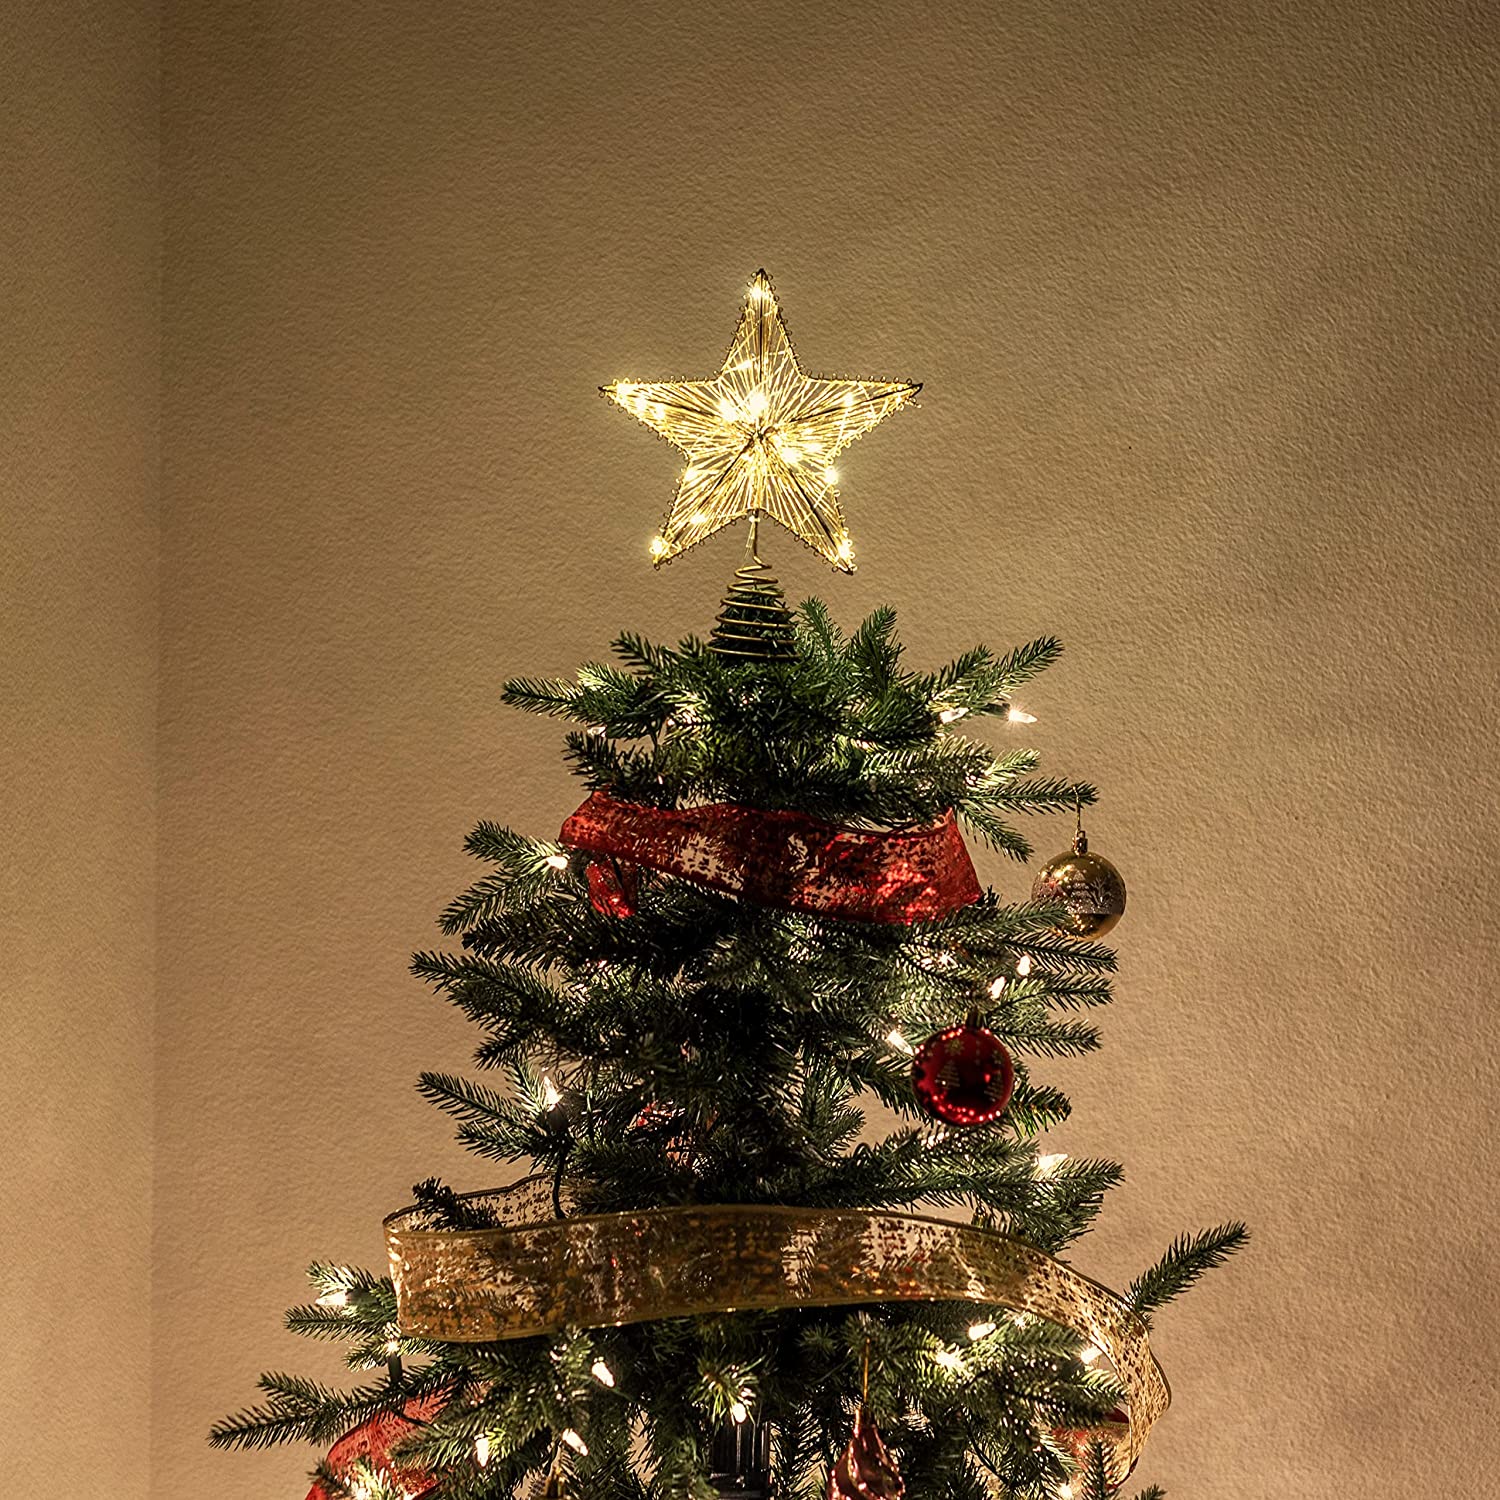 Joiedomi 10 Gold Star Tree Topper w/Projectorights 